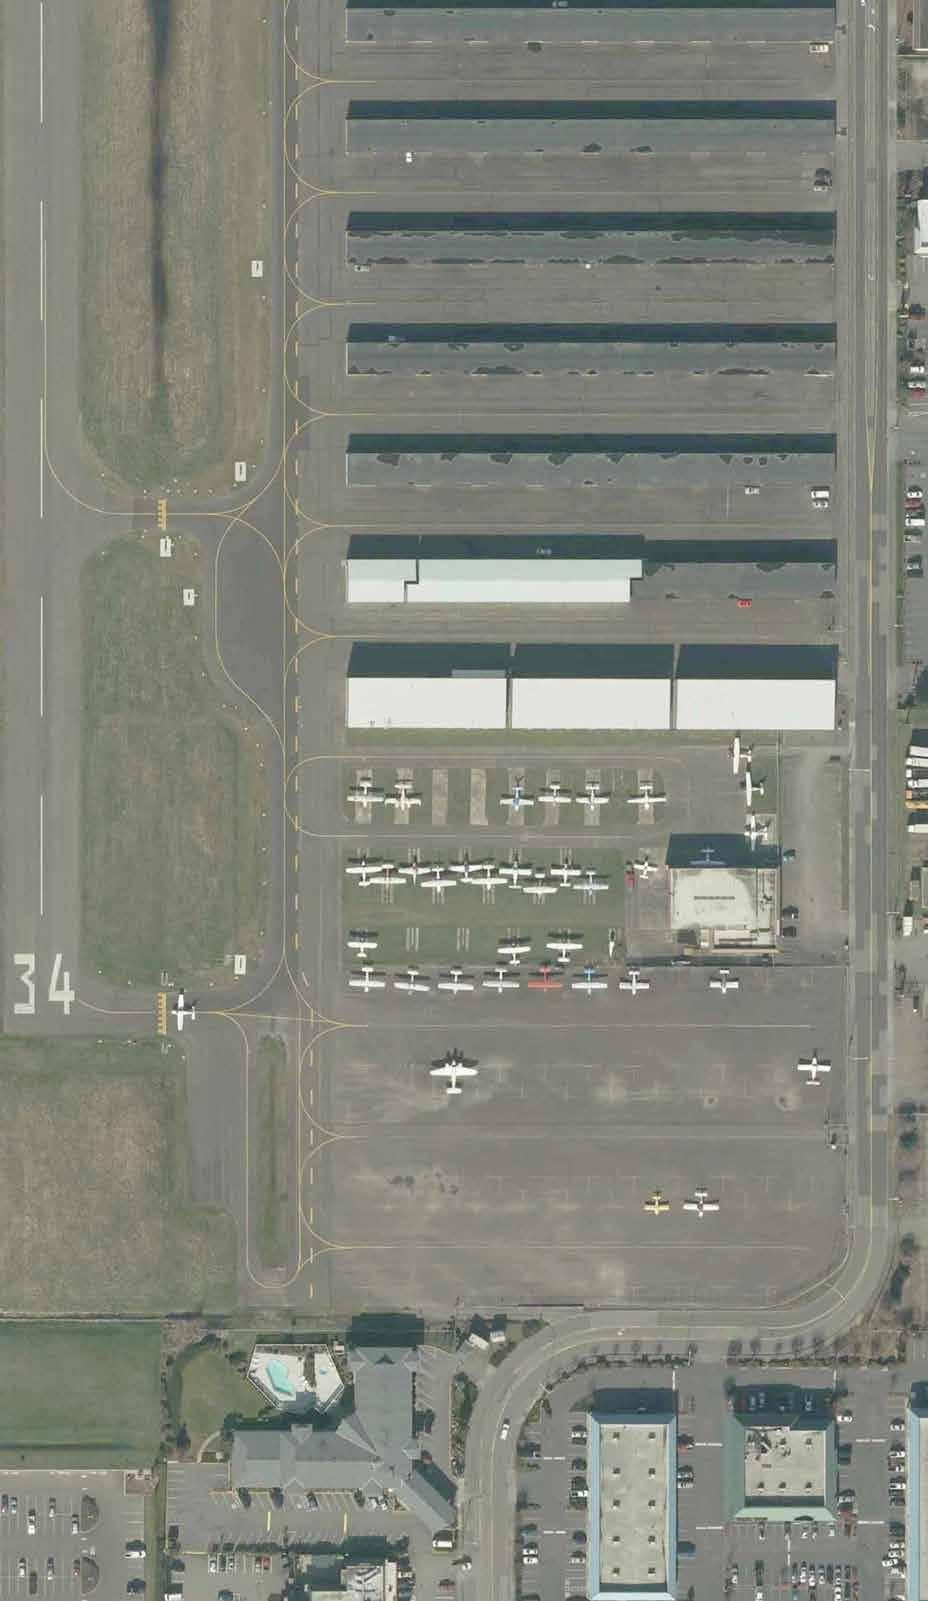 NE E STREET TAXILANE OFA (HANGARS) TAXILANE OFA (PARKED AC) TAXILANE OFA (PARKED VEHICLES) * RPZ (AIRPORT CONTROL) * TAXILANE/TAXIWAY OBJECT FREE AREA PARKED VEHICLES OBSERVED IN VARIOUS HANGAR ROWS.